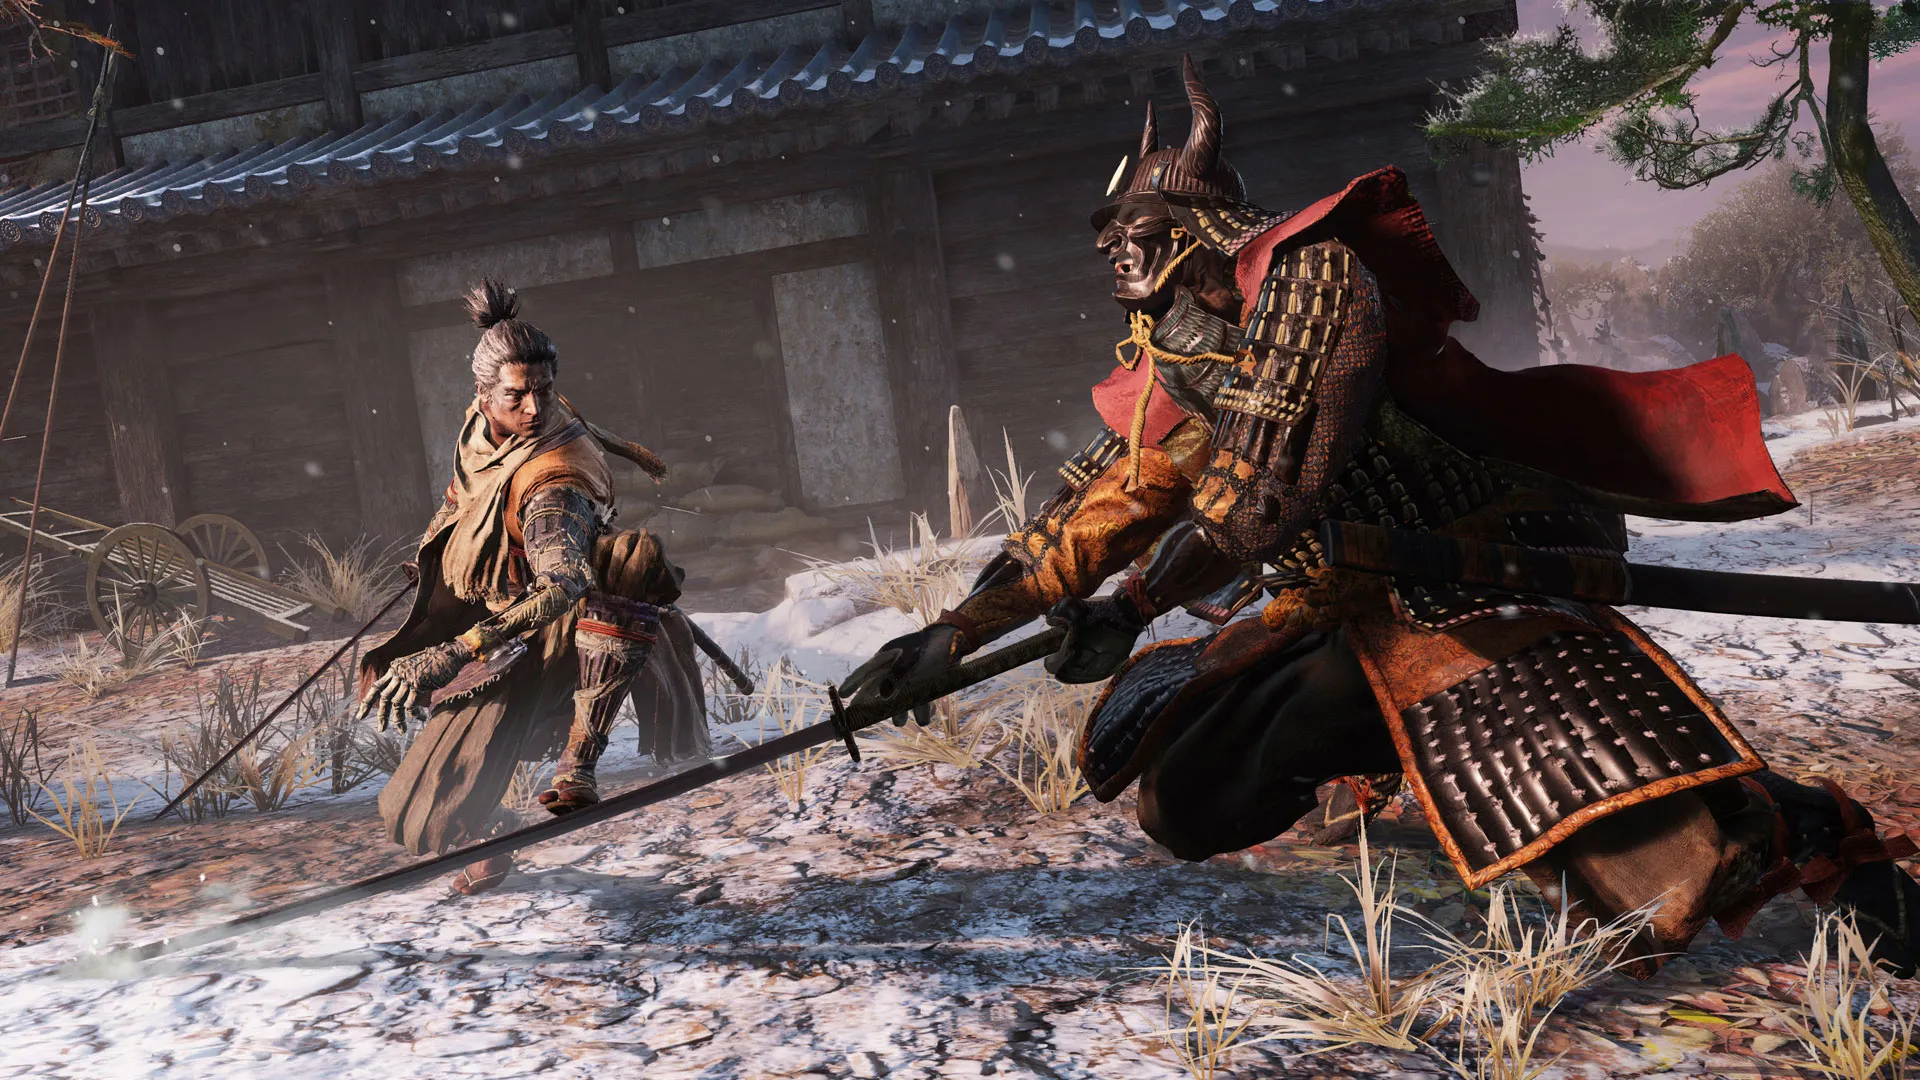 Help Kuro or Obey the Iron Code | Should I choose to Protect Kuro in Sekiro?  - GameRevolution